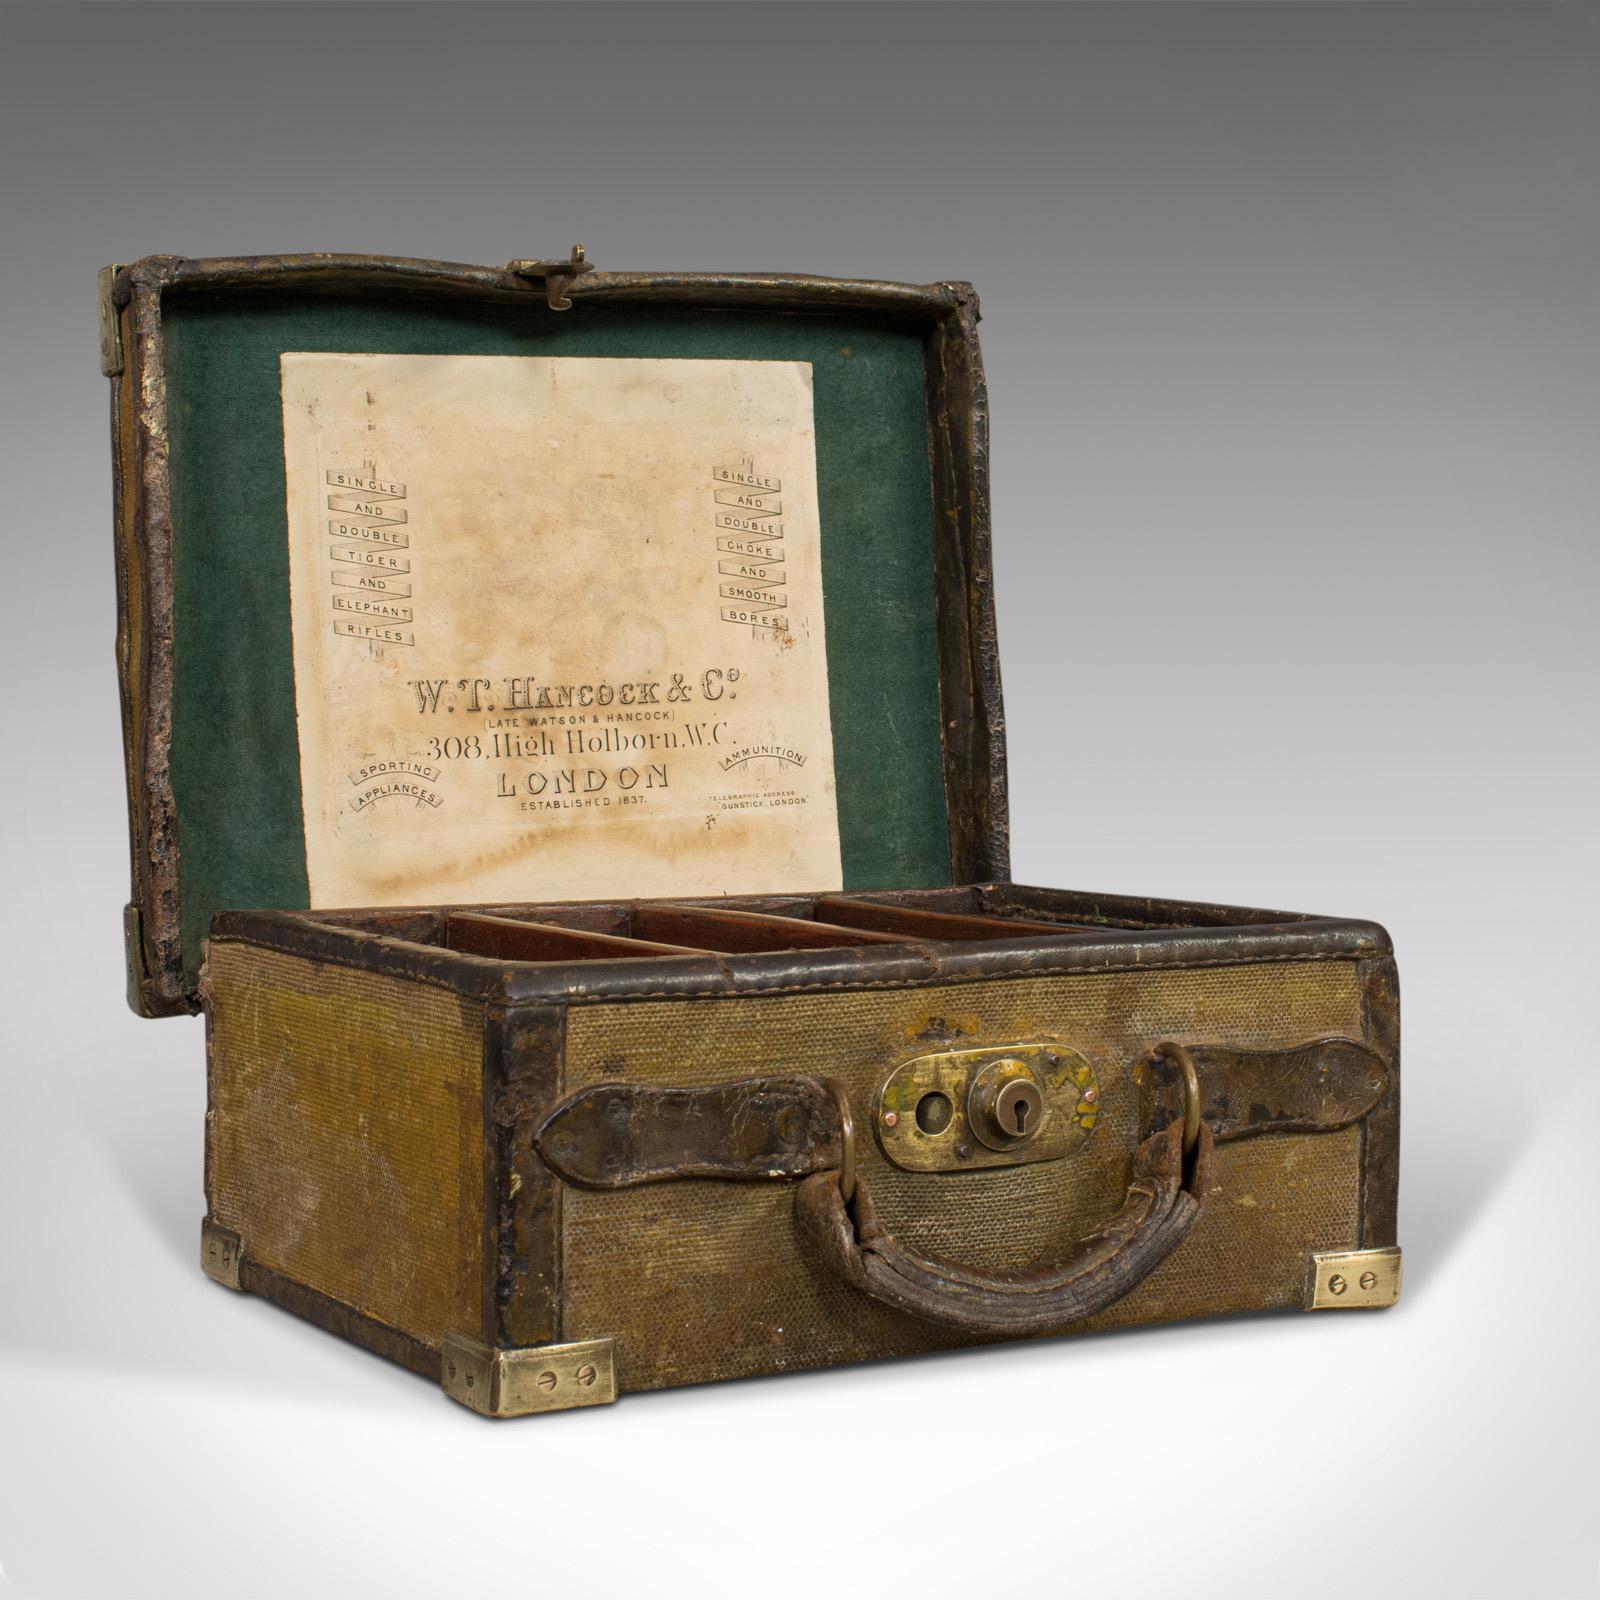 This is an antique cartridge case. An English, leather-bound canvas personal sporting trunk, dating to the Victorian period circa 1890.

A fascinating Victorian past-time piece
Displays a desirable aged patina
Olive coloured canvas over wooden